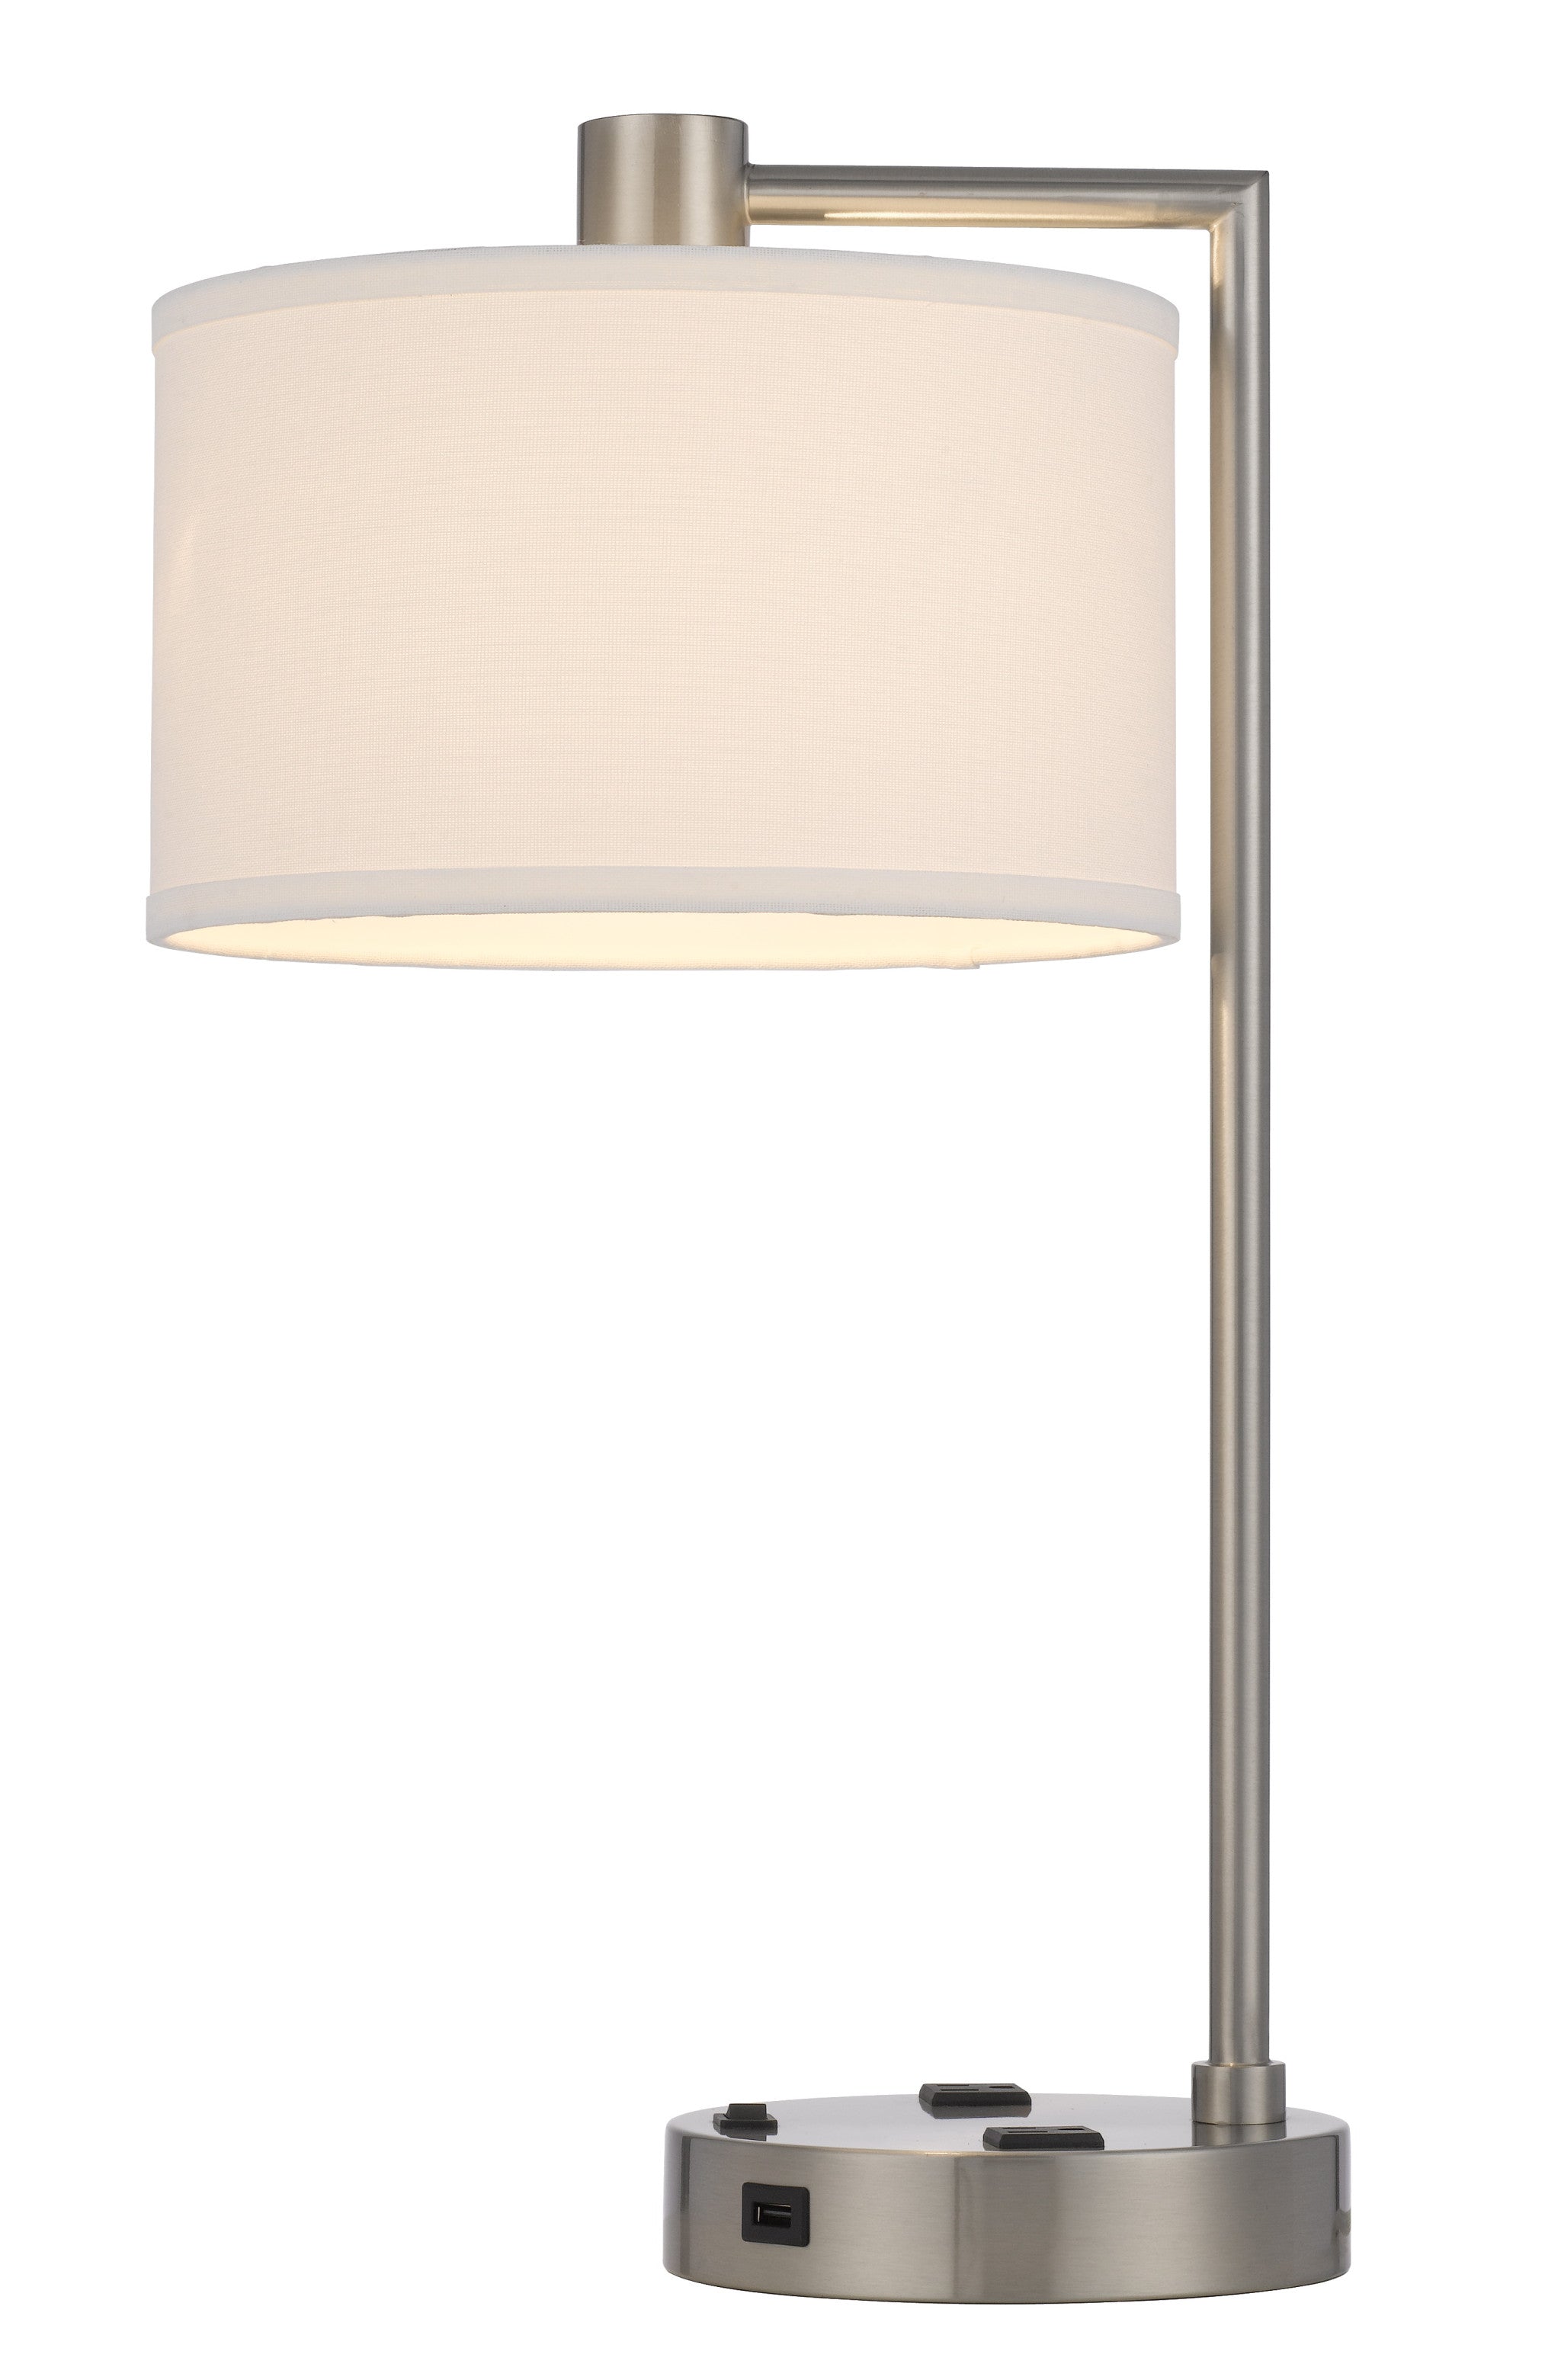 22" Nickel Metal Desk Usb Table Lamp With White Drum Shade